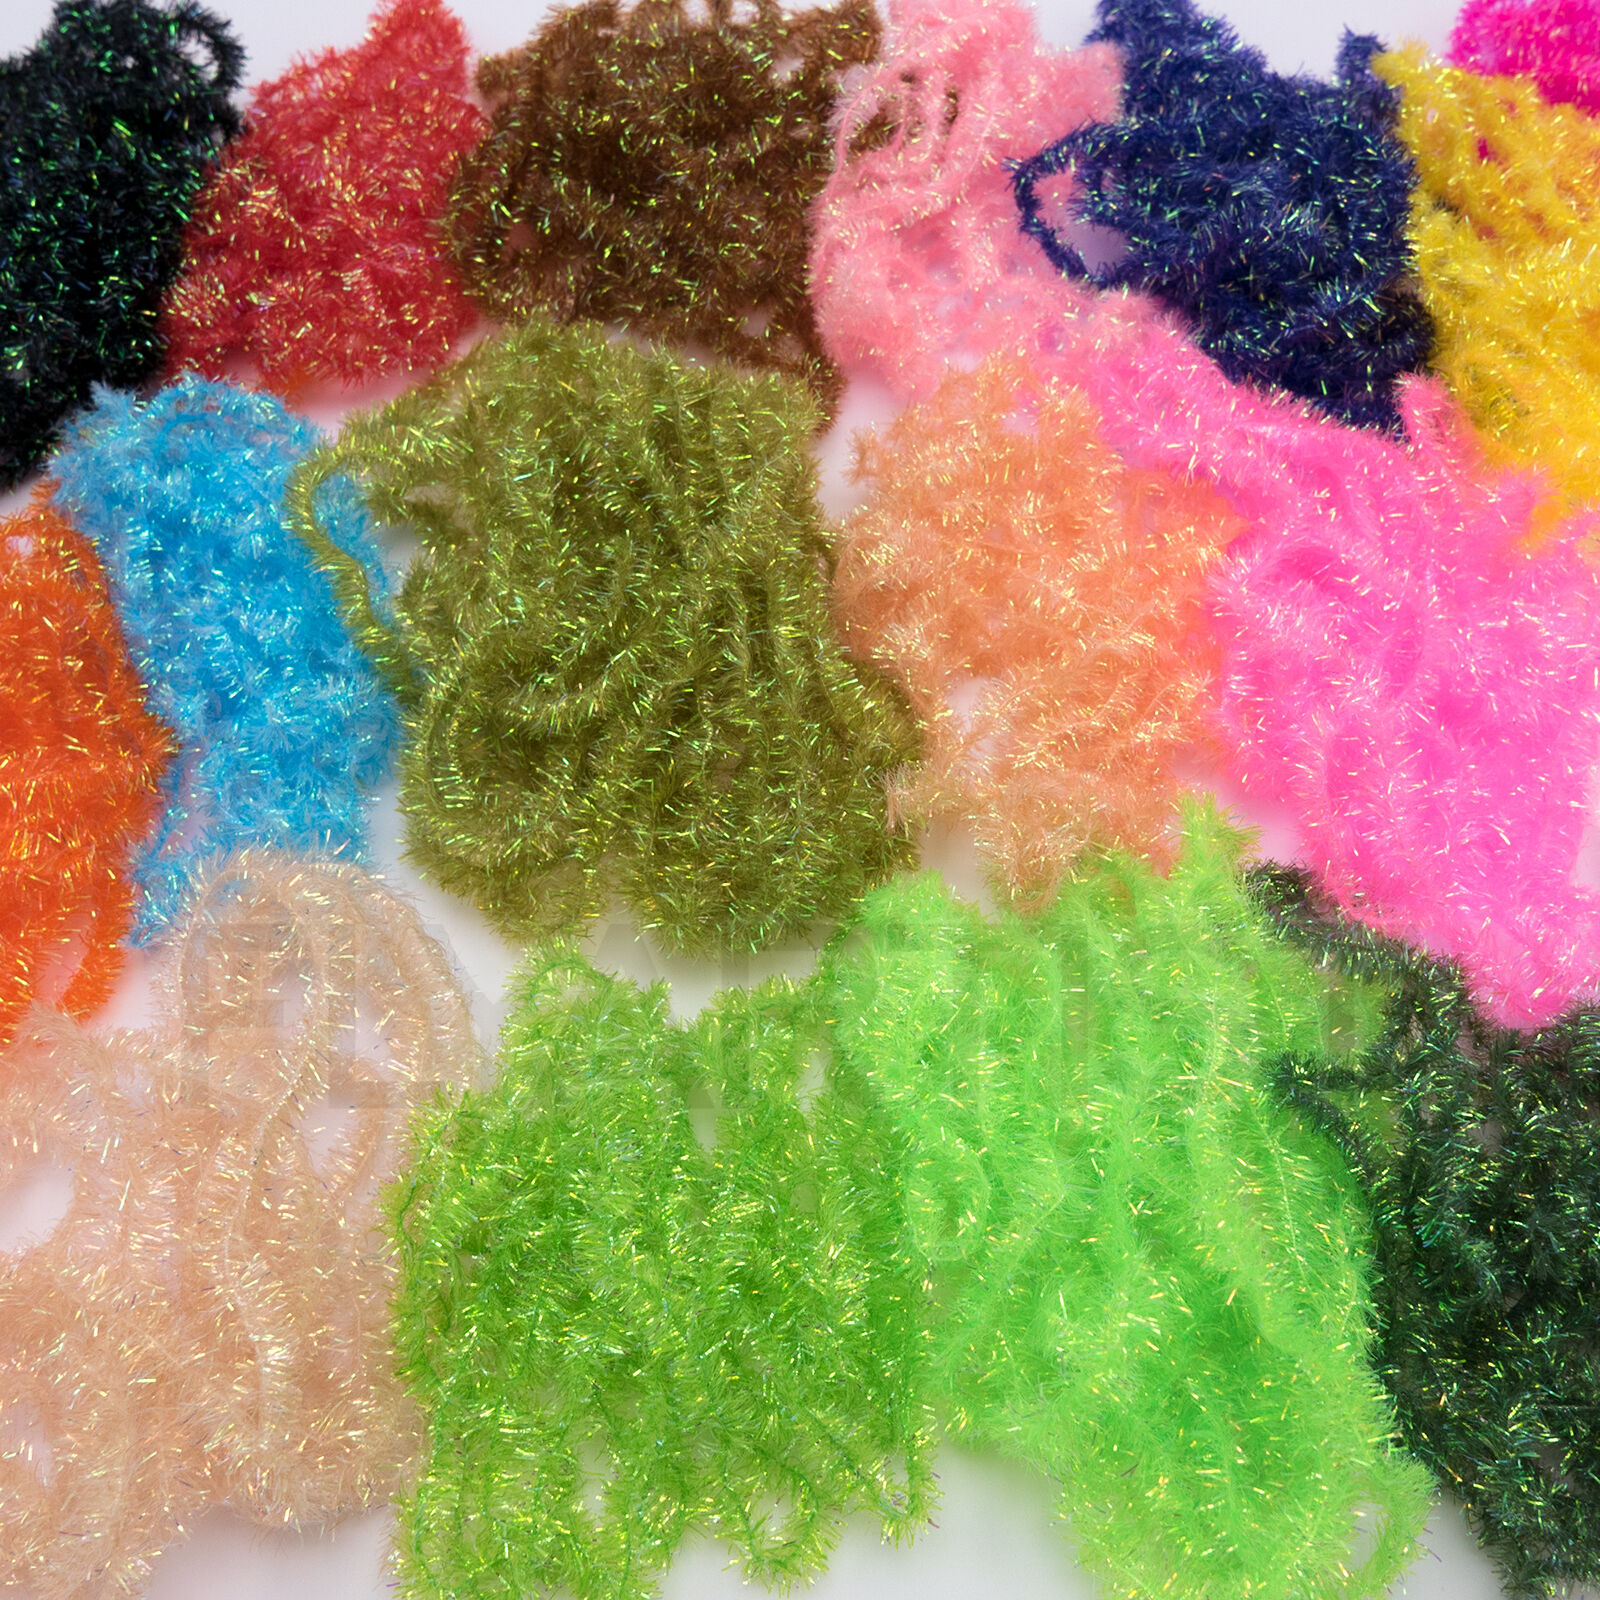 Cactus Chenille - Midge, Medium, Or Large - Hareline Fly Tying Material New!